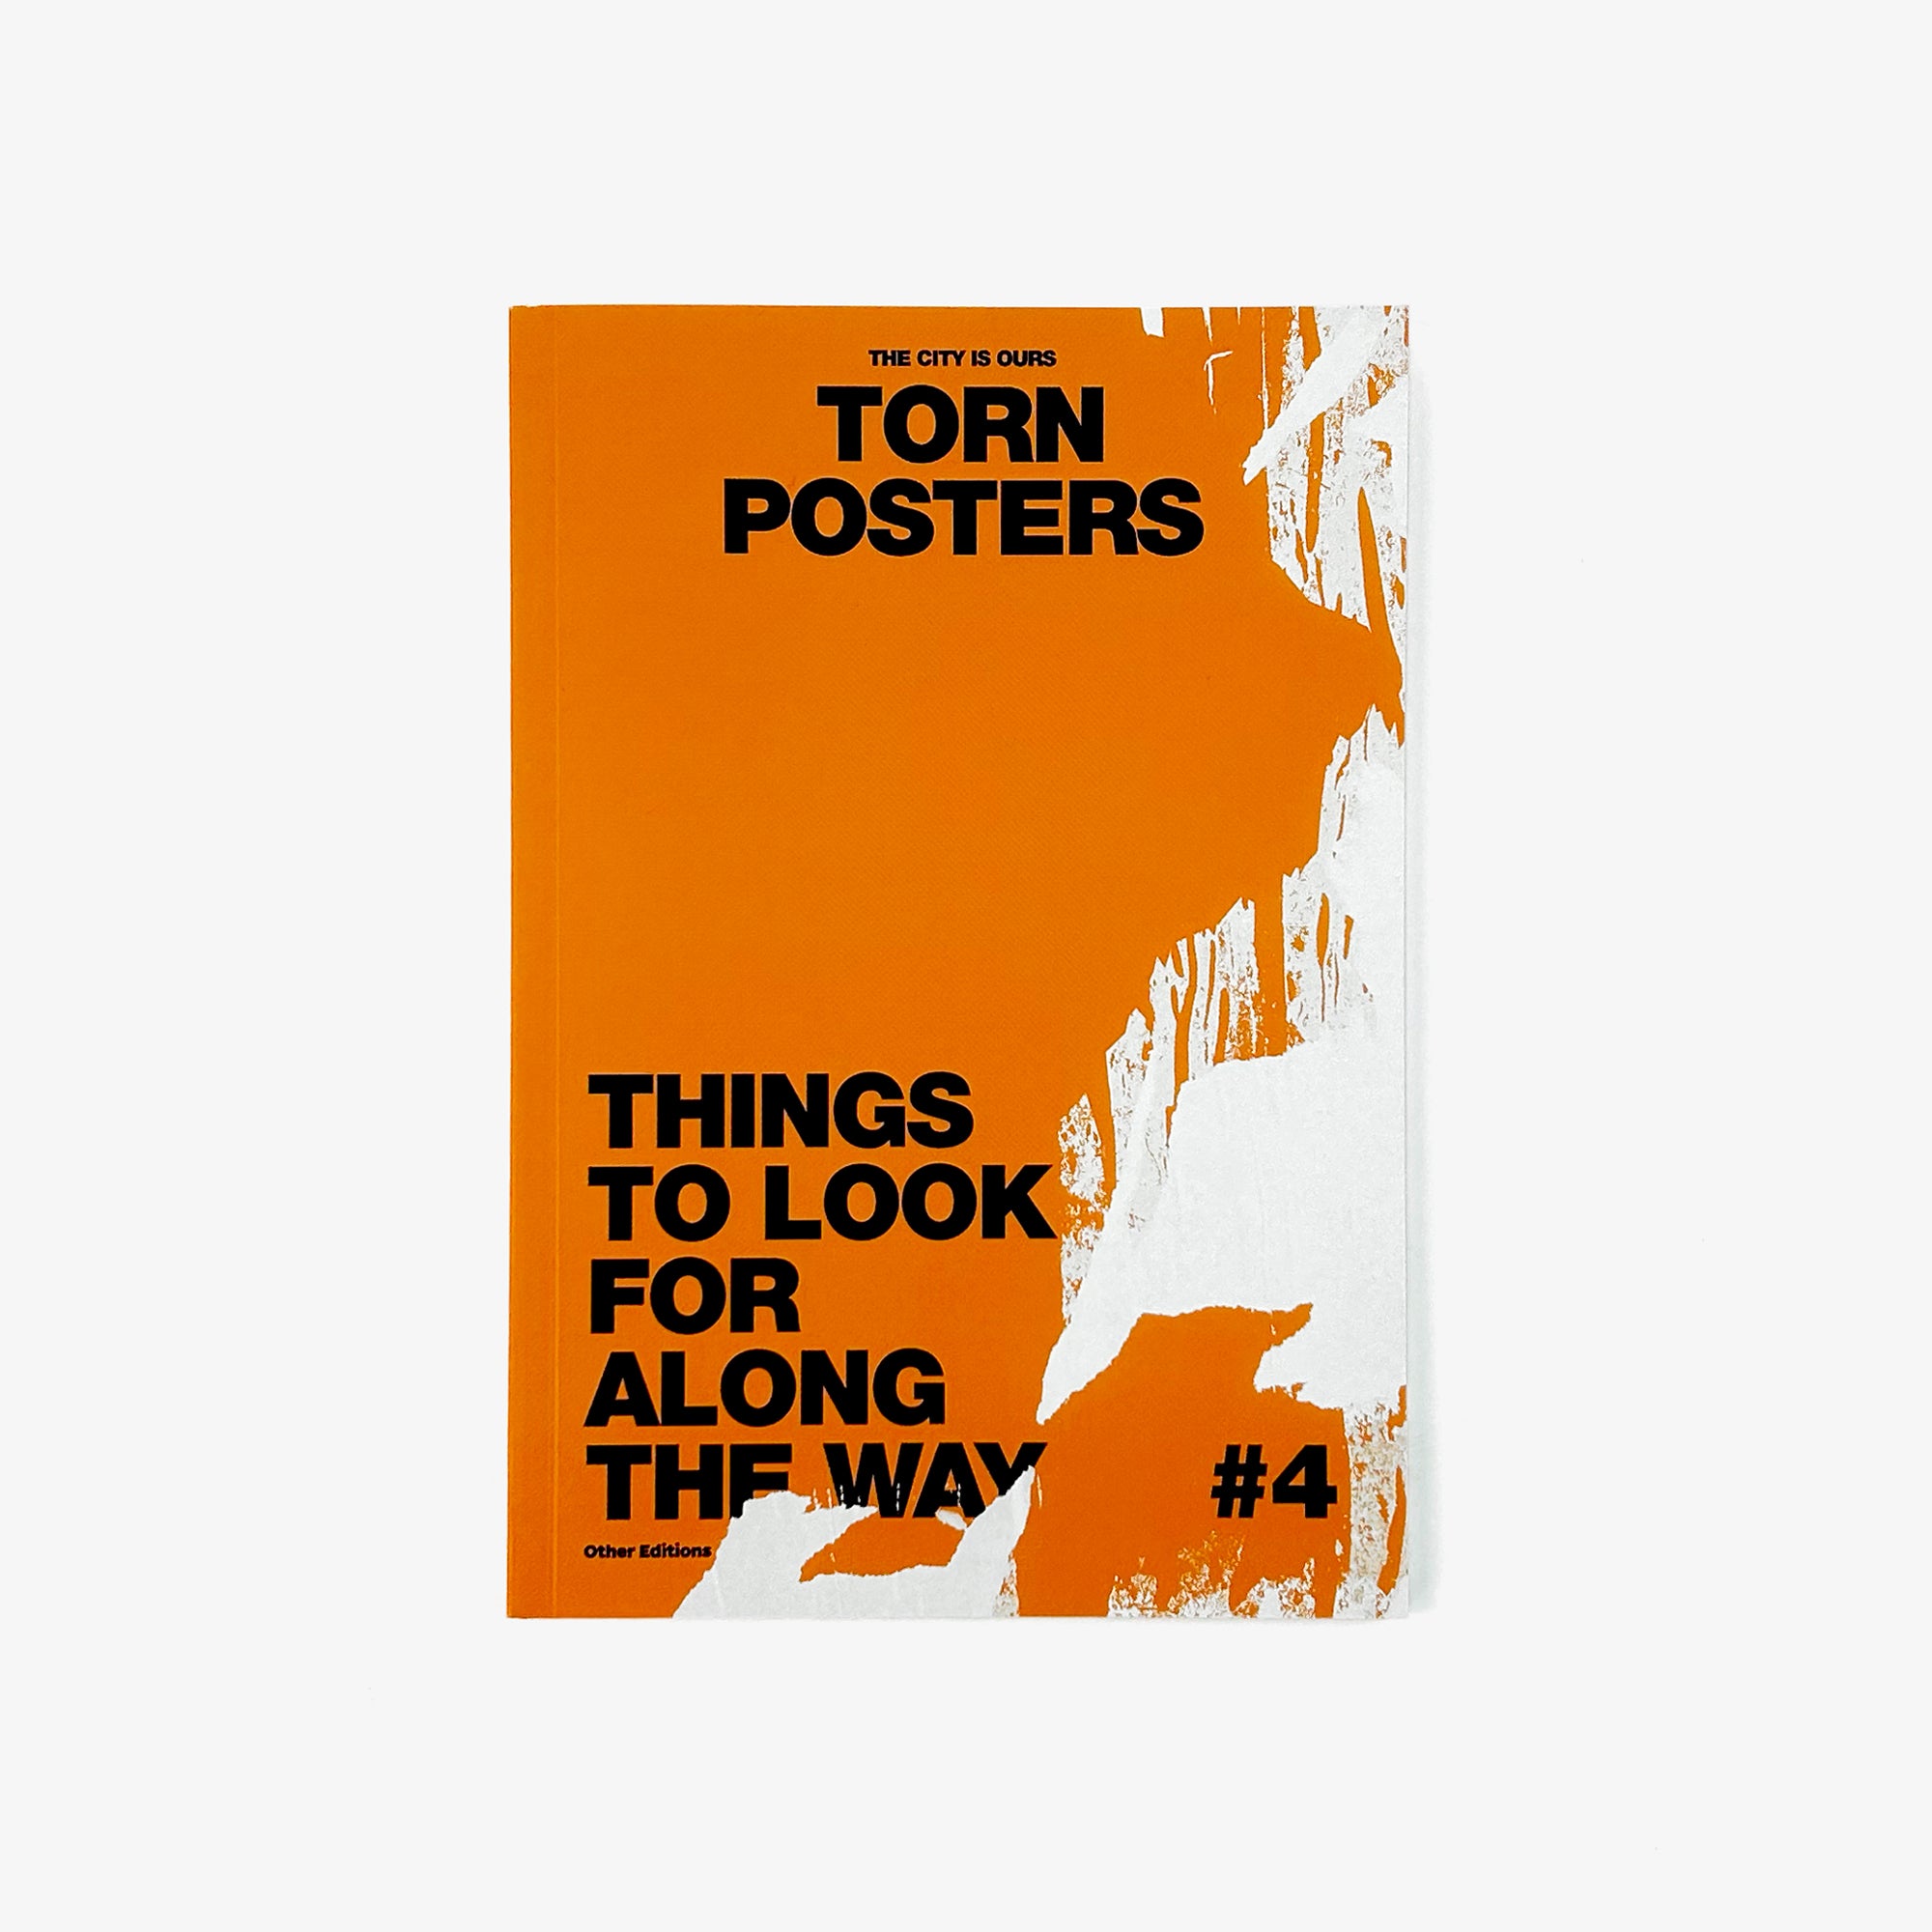 Torn Posters